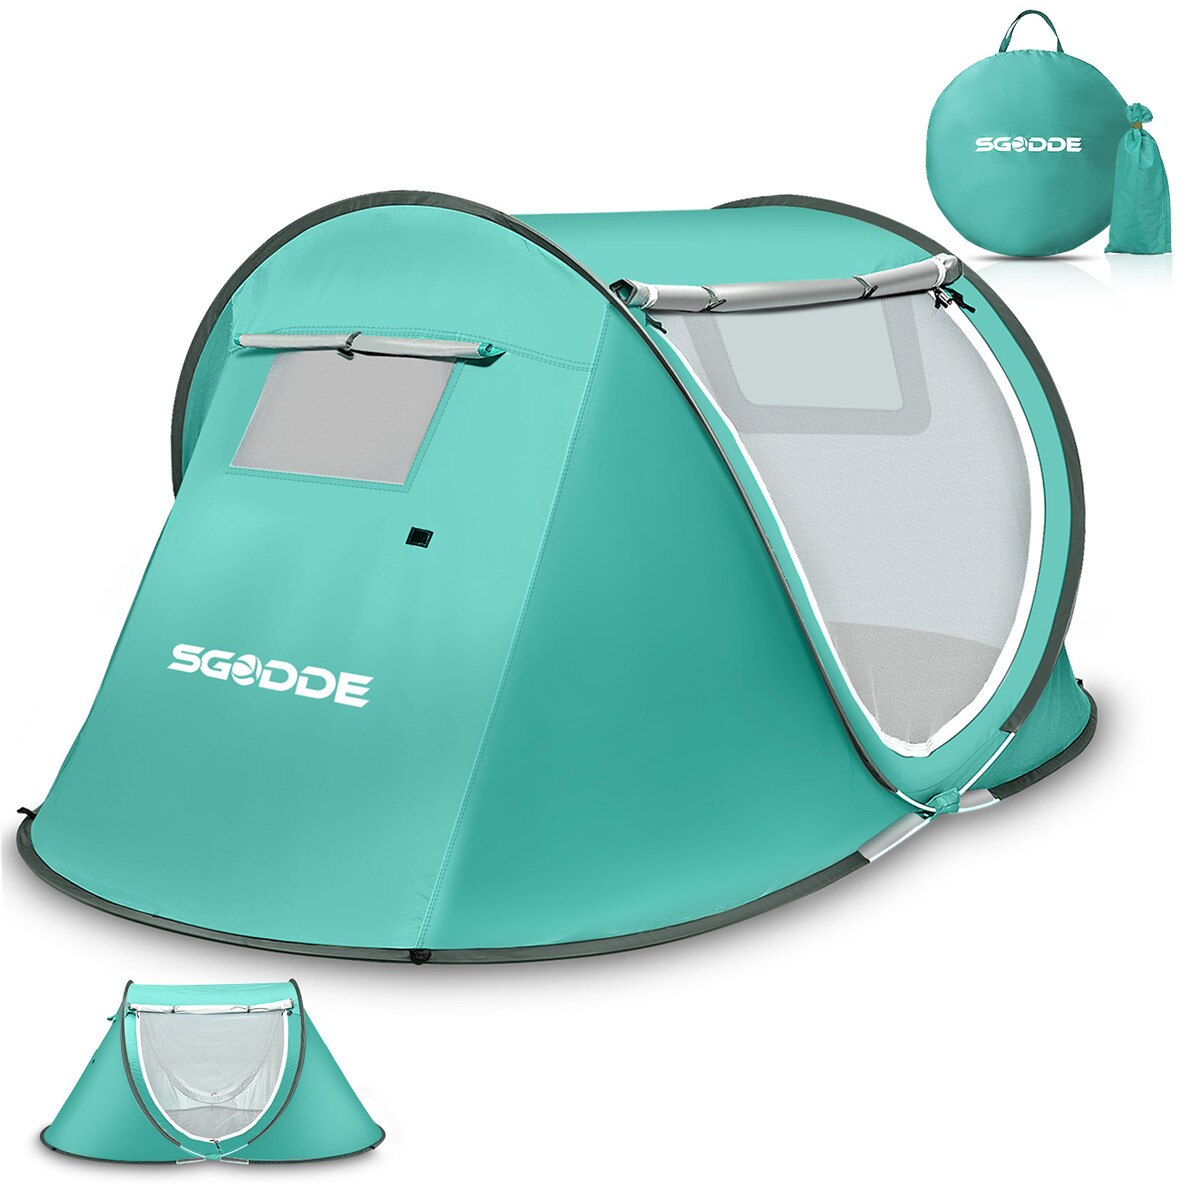 Fully Automatic Camping Tent